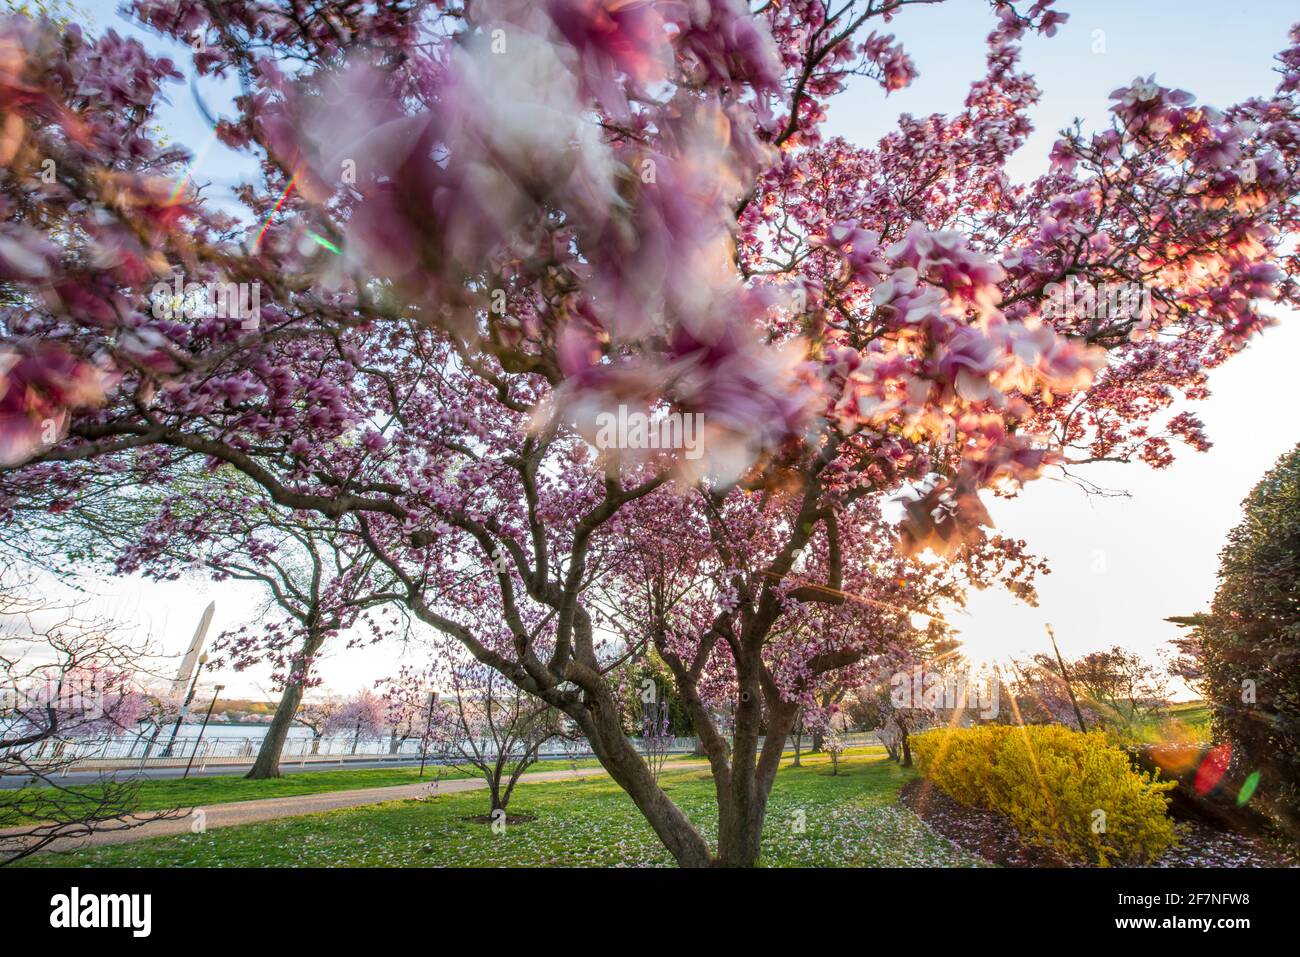 Cherry blossoms in full bloom at the Tidal Basin on the National Mall in Washington, D.C. Stock Photo